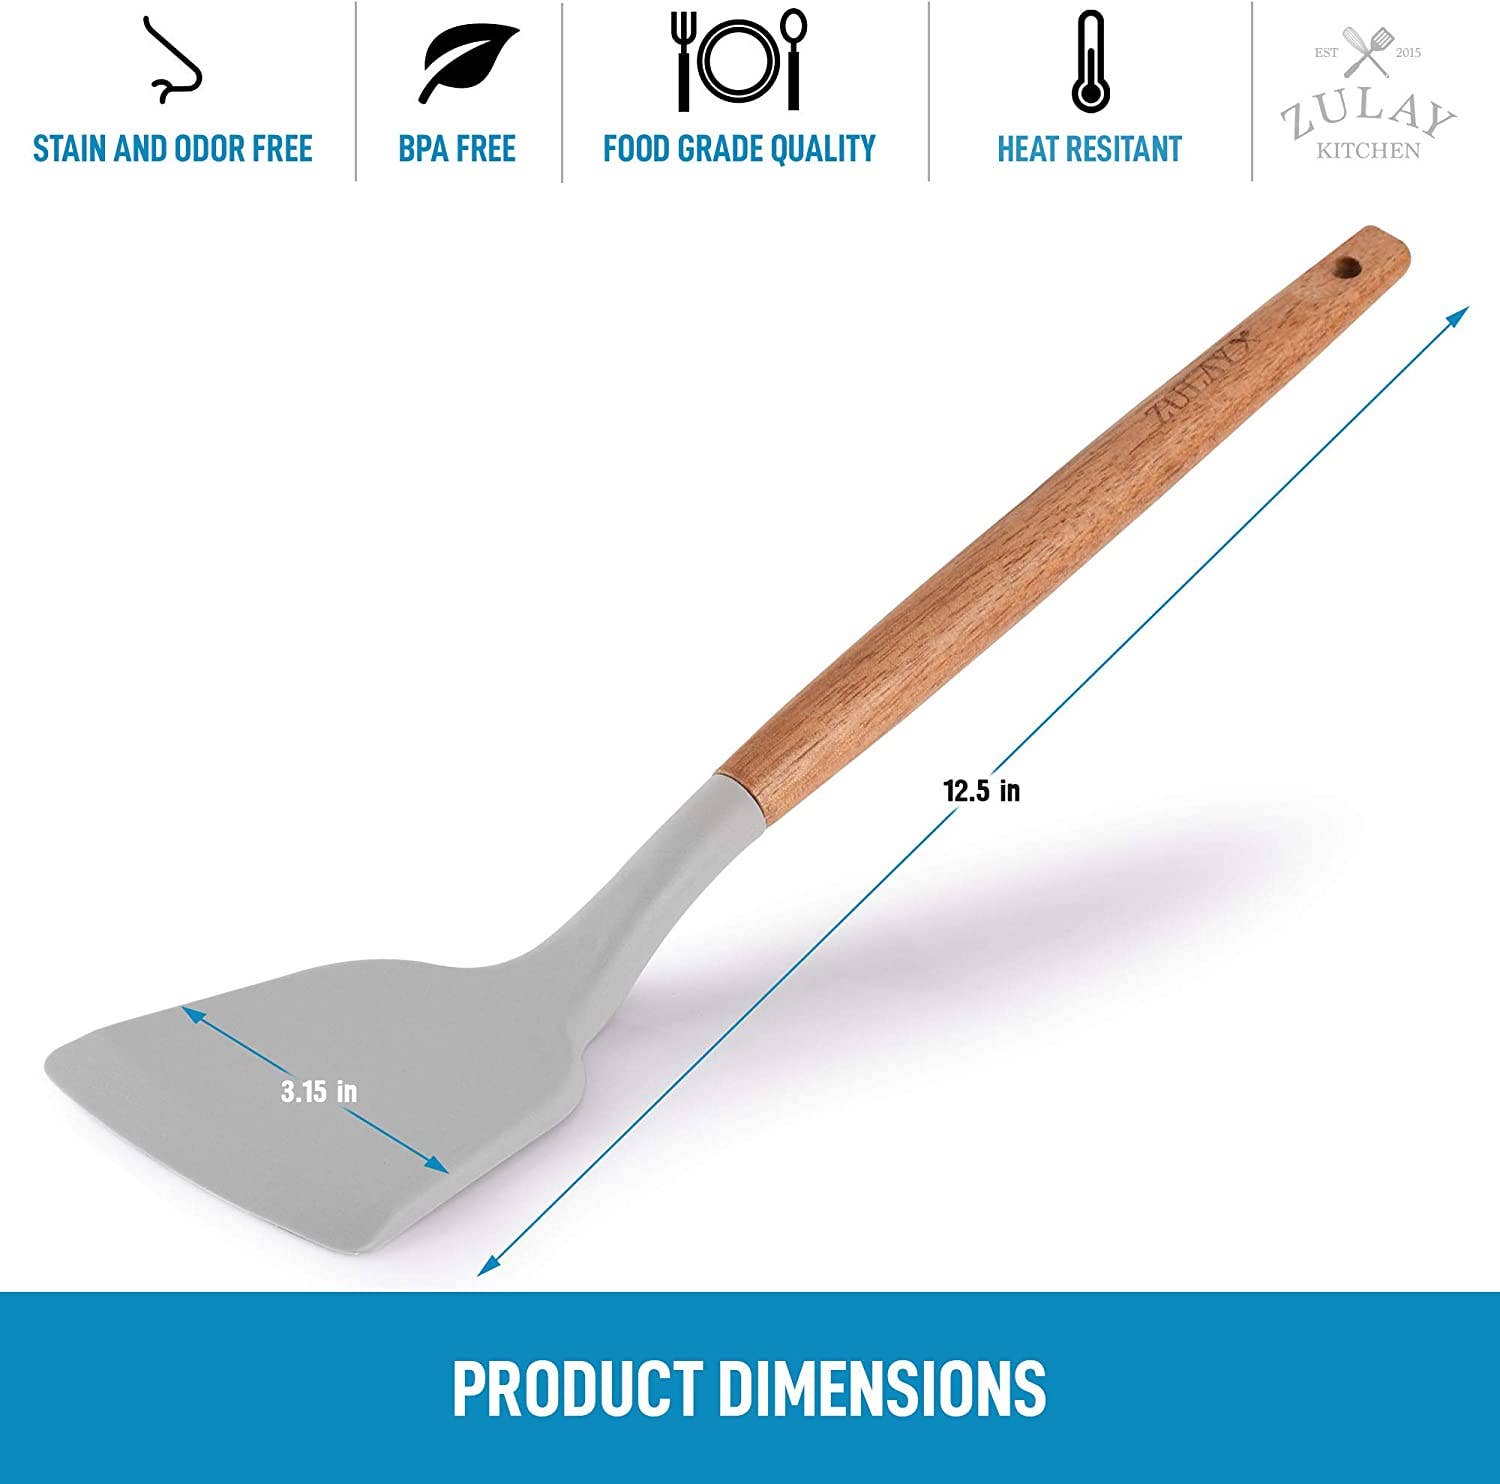 The spatula is BPA-free, food grade quality and measures 3.15 inches across by 12.5 inches long.